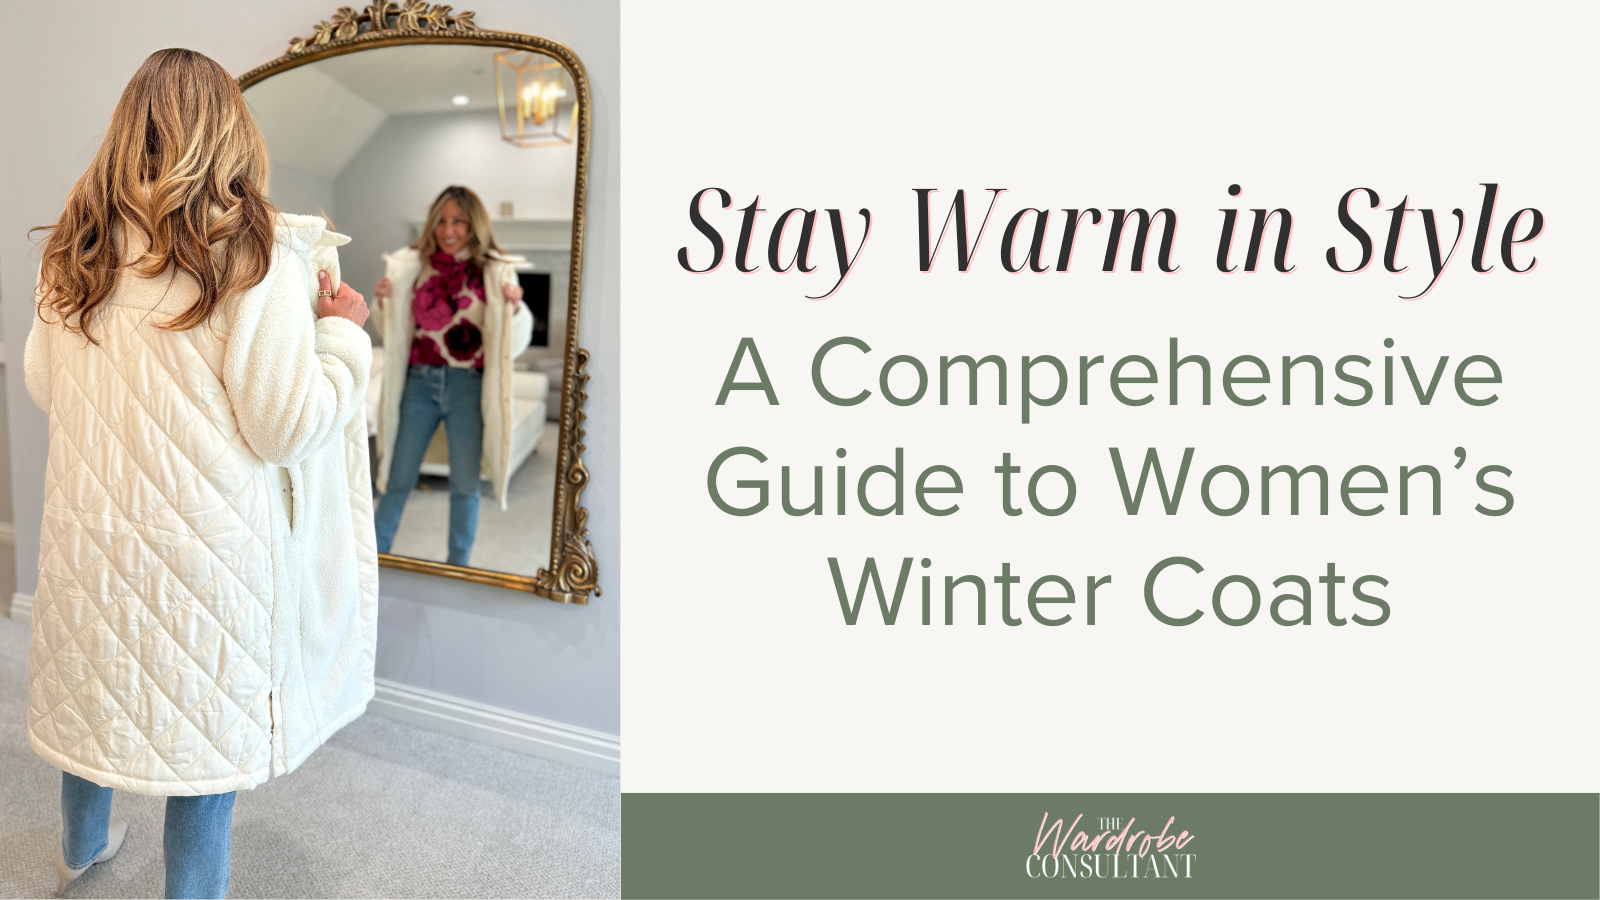 Stay Warm in Style: A Comprehensive Guide to Women's Winter Coats